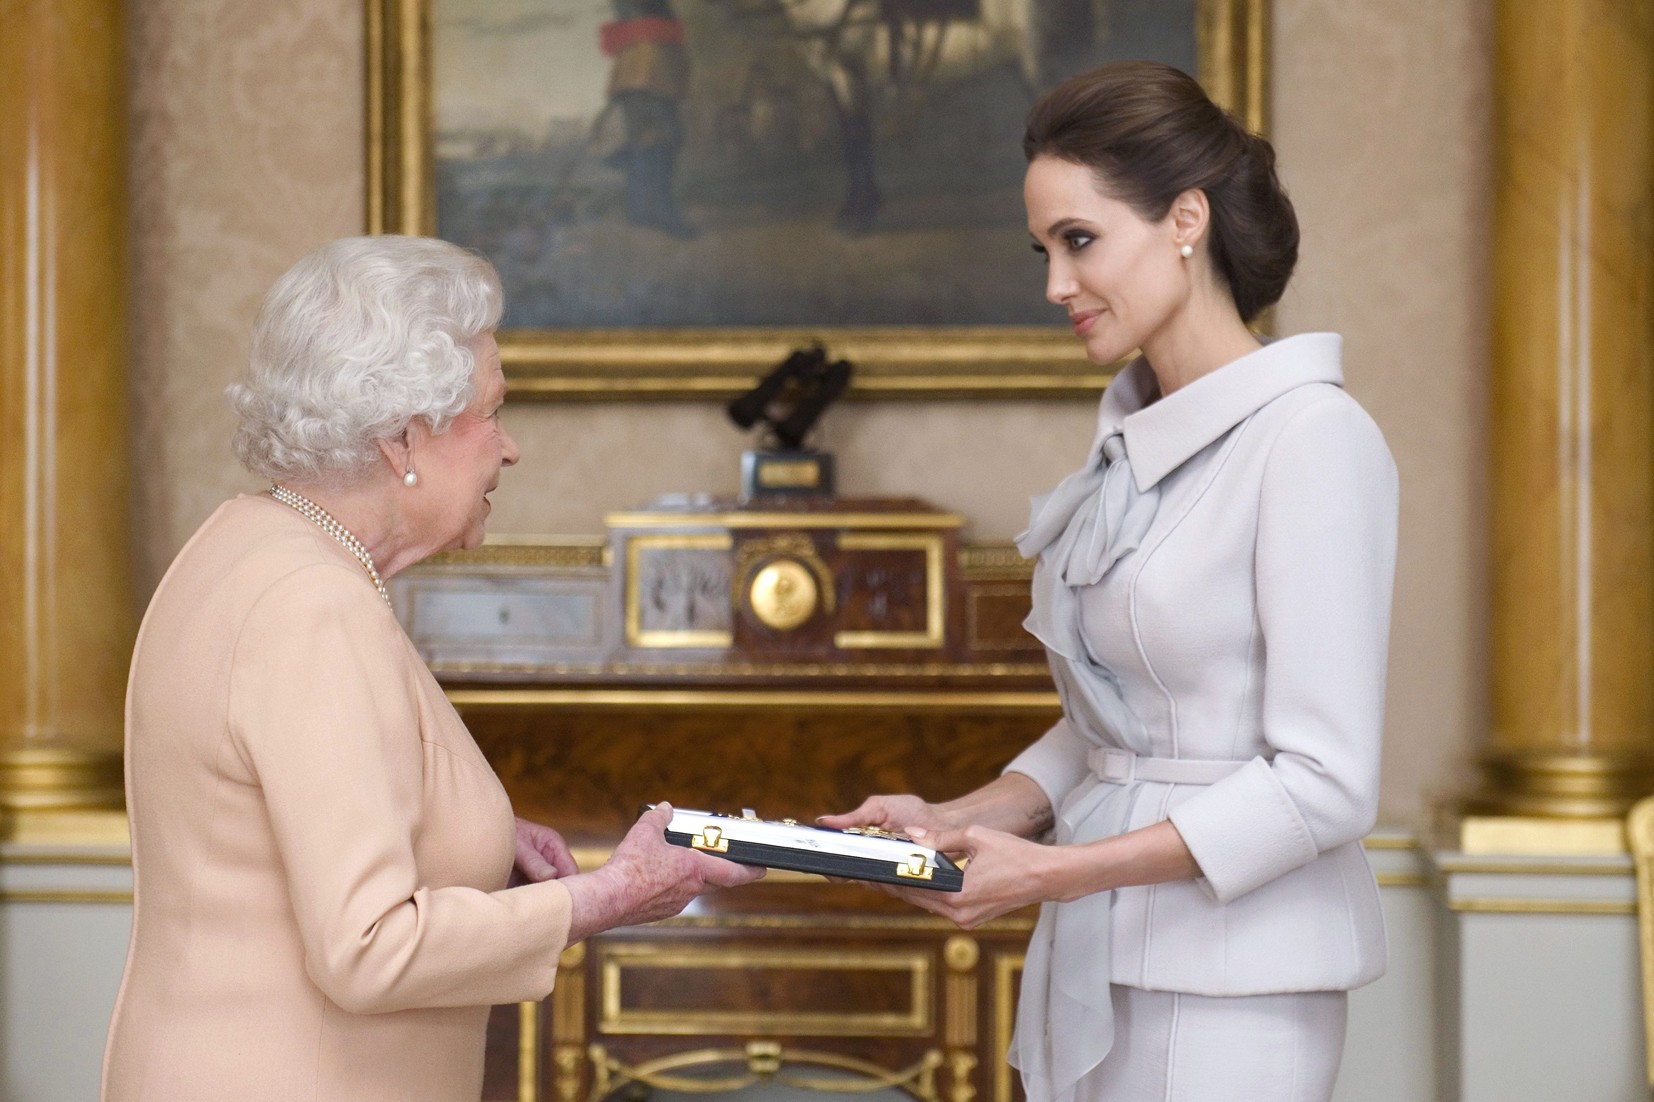 Actress Angelina Jolie is presented with the Insignia of an Honorary Dame Grand Cross of the Most Distinguished Order of St Michael and St George by Queen Elizabeth II in the 1844 Room at Buckingham Palace, London. (Foto: PA Wire/Press Association Images)